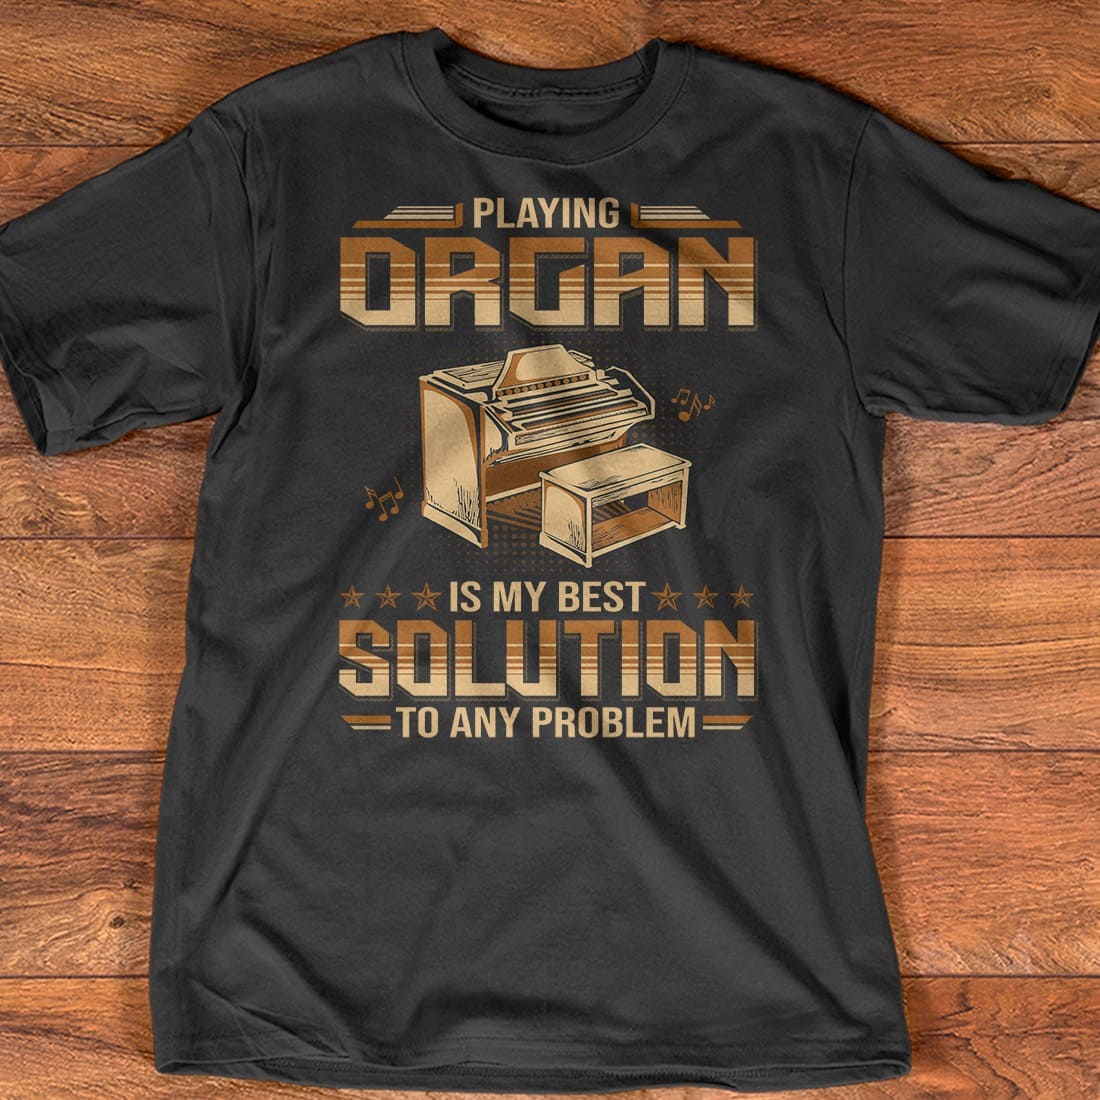 Organ Player - Playing organ is my best solution to any problem